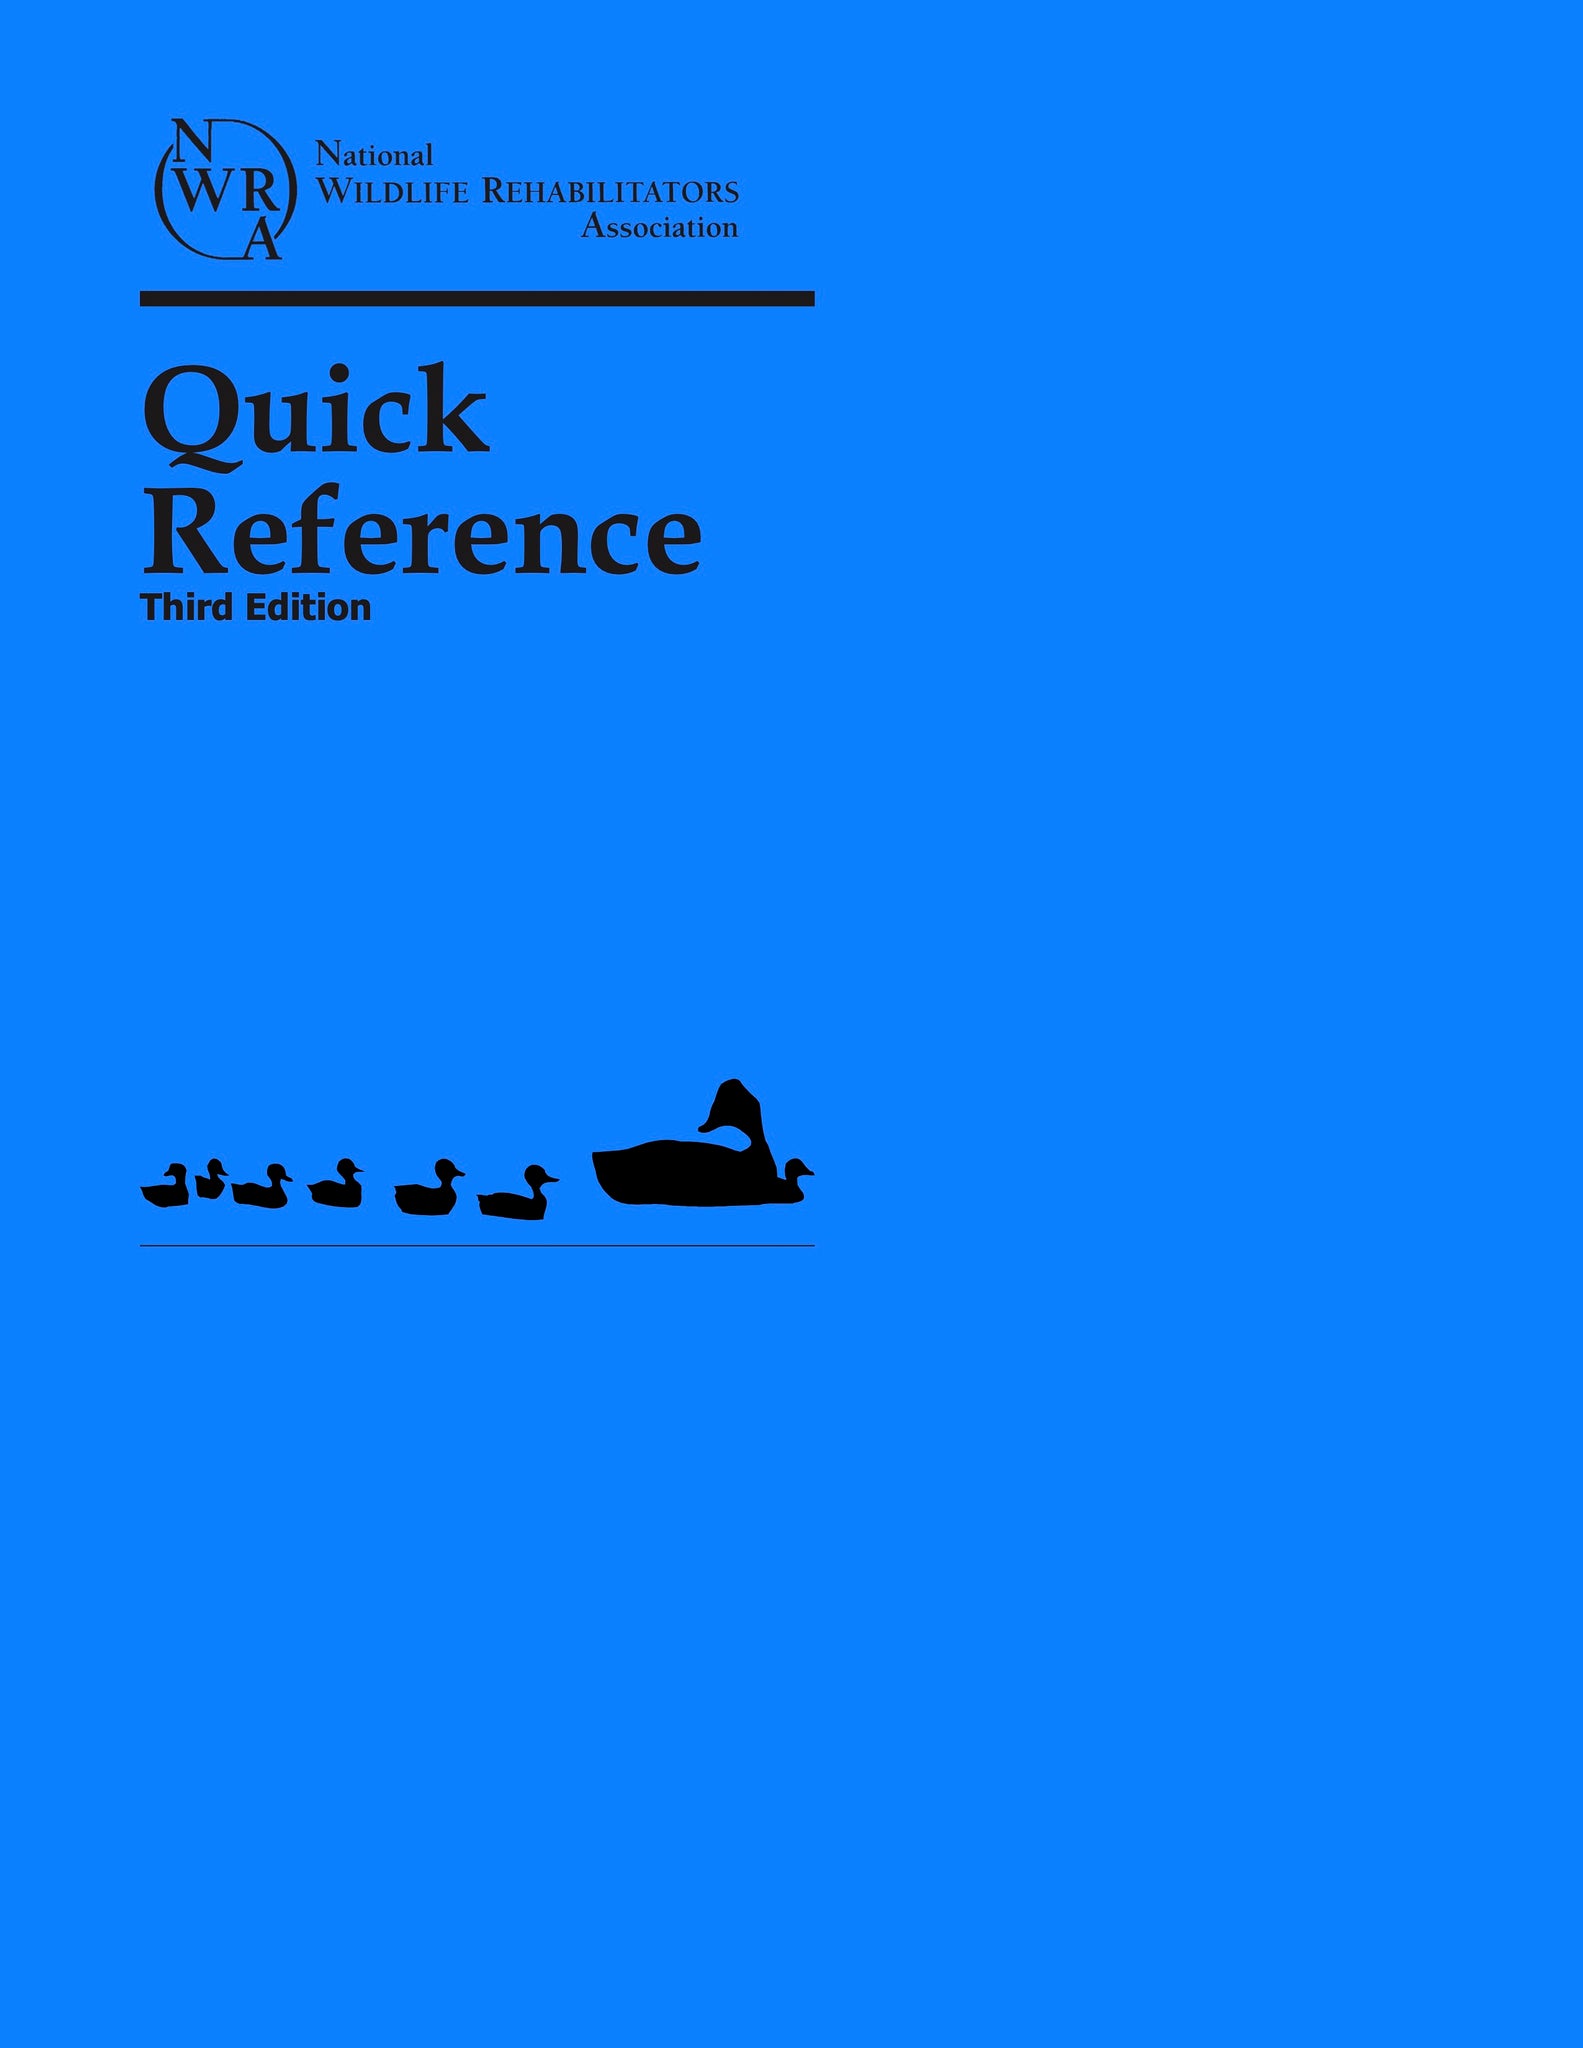 Quick Reference 3rd Edition – National Wildlife Rehabilitators